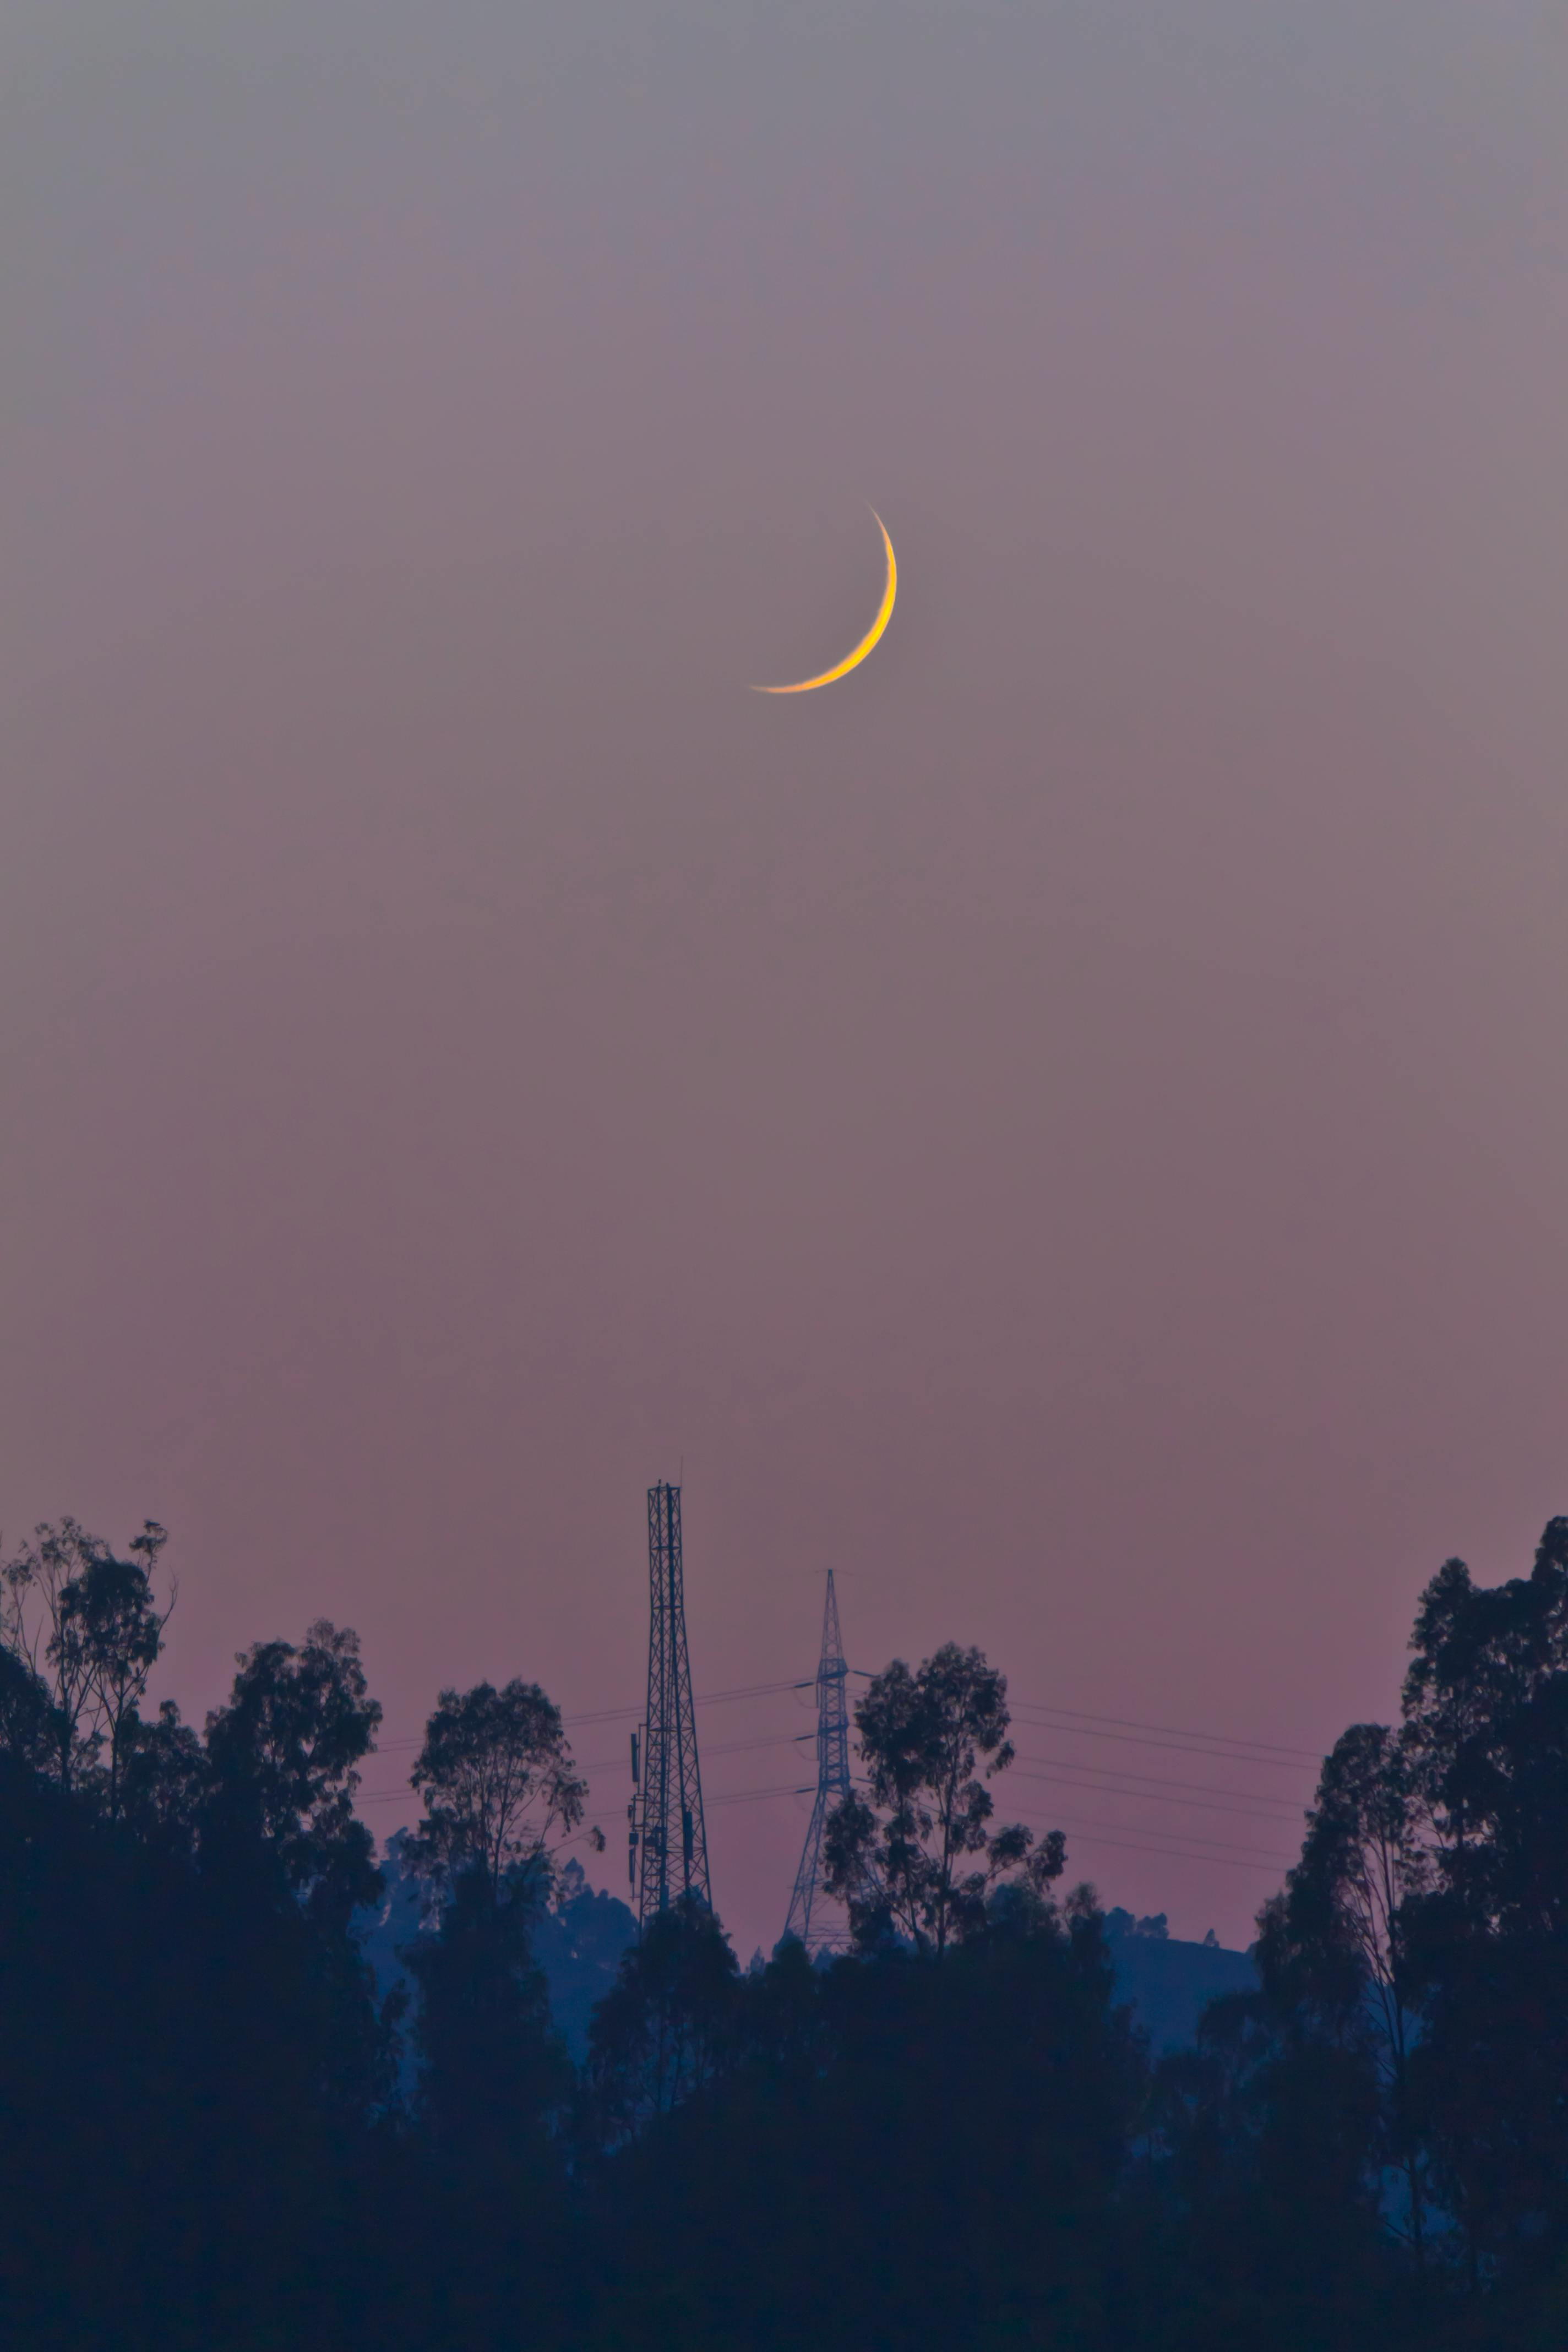 Crescent Moon Photos, Download The BEST Free Crescent Moon Stock